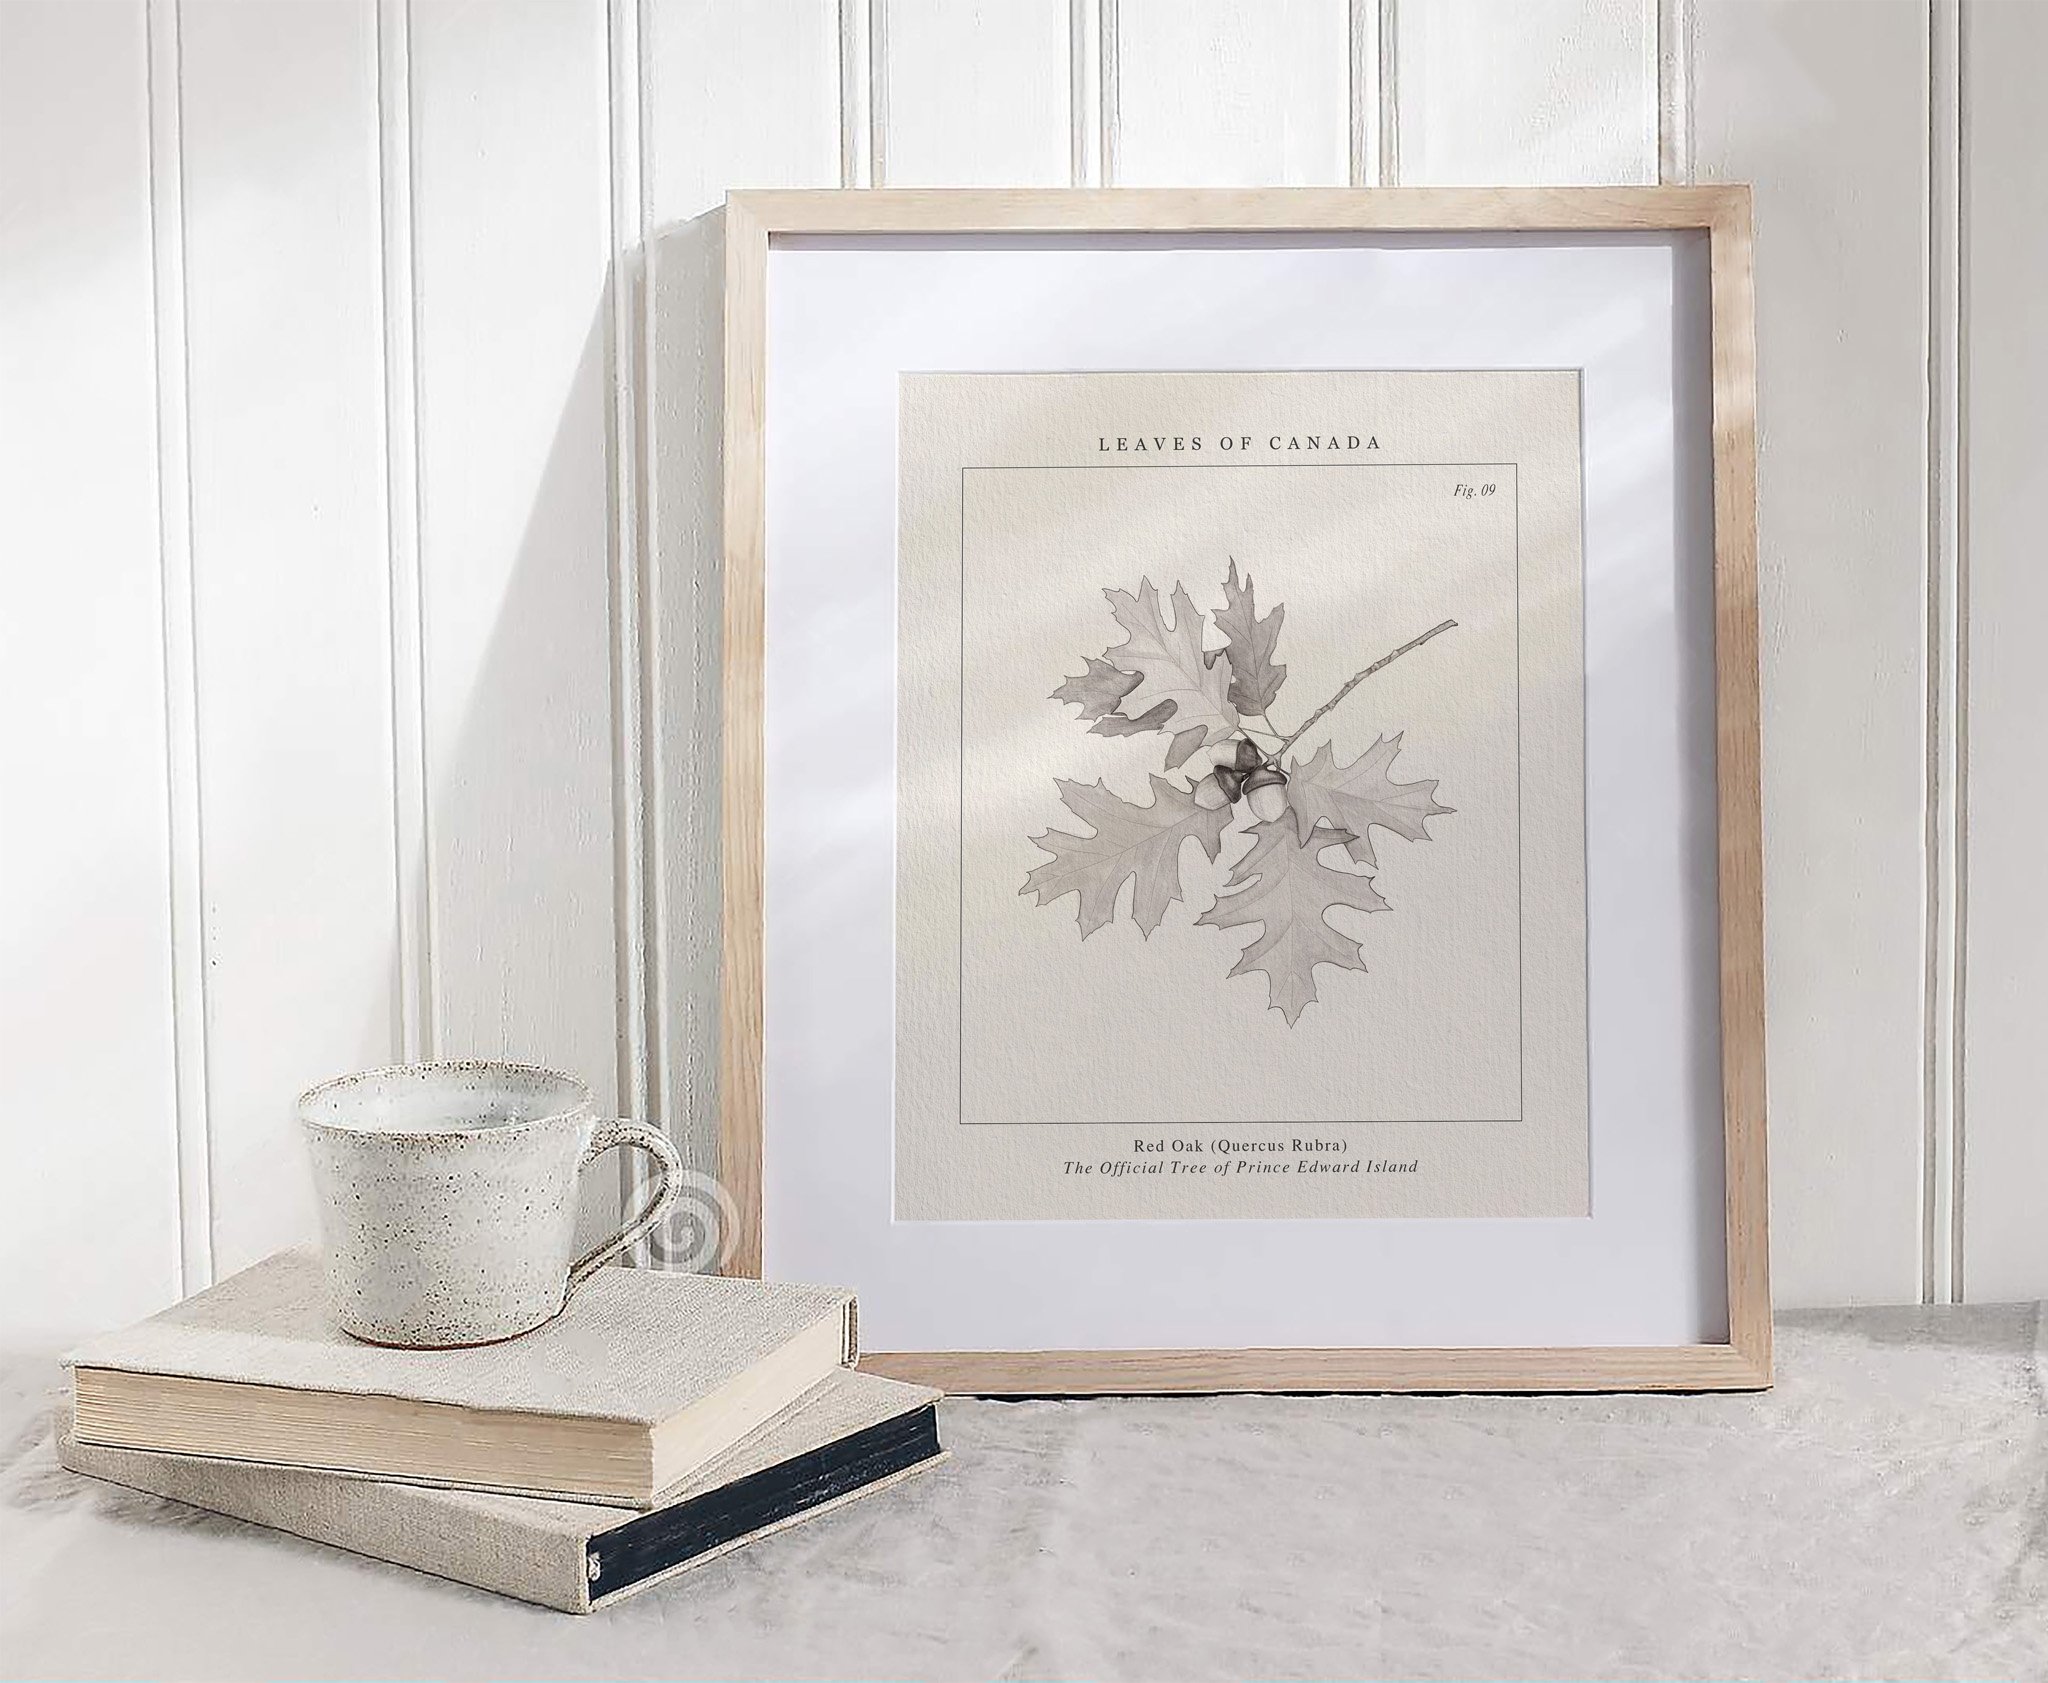 Canadian Red Oak botanical wall art with wooden frame on a light background next to couple of books and a cup on them